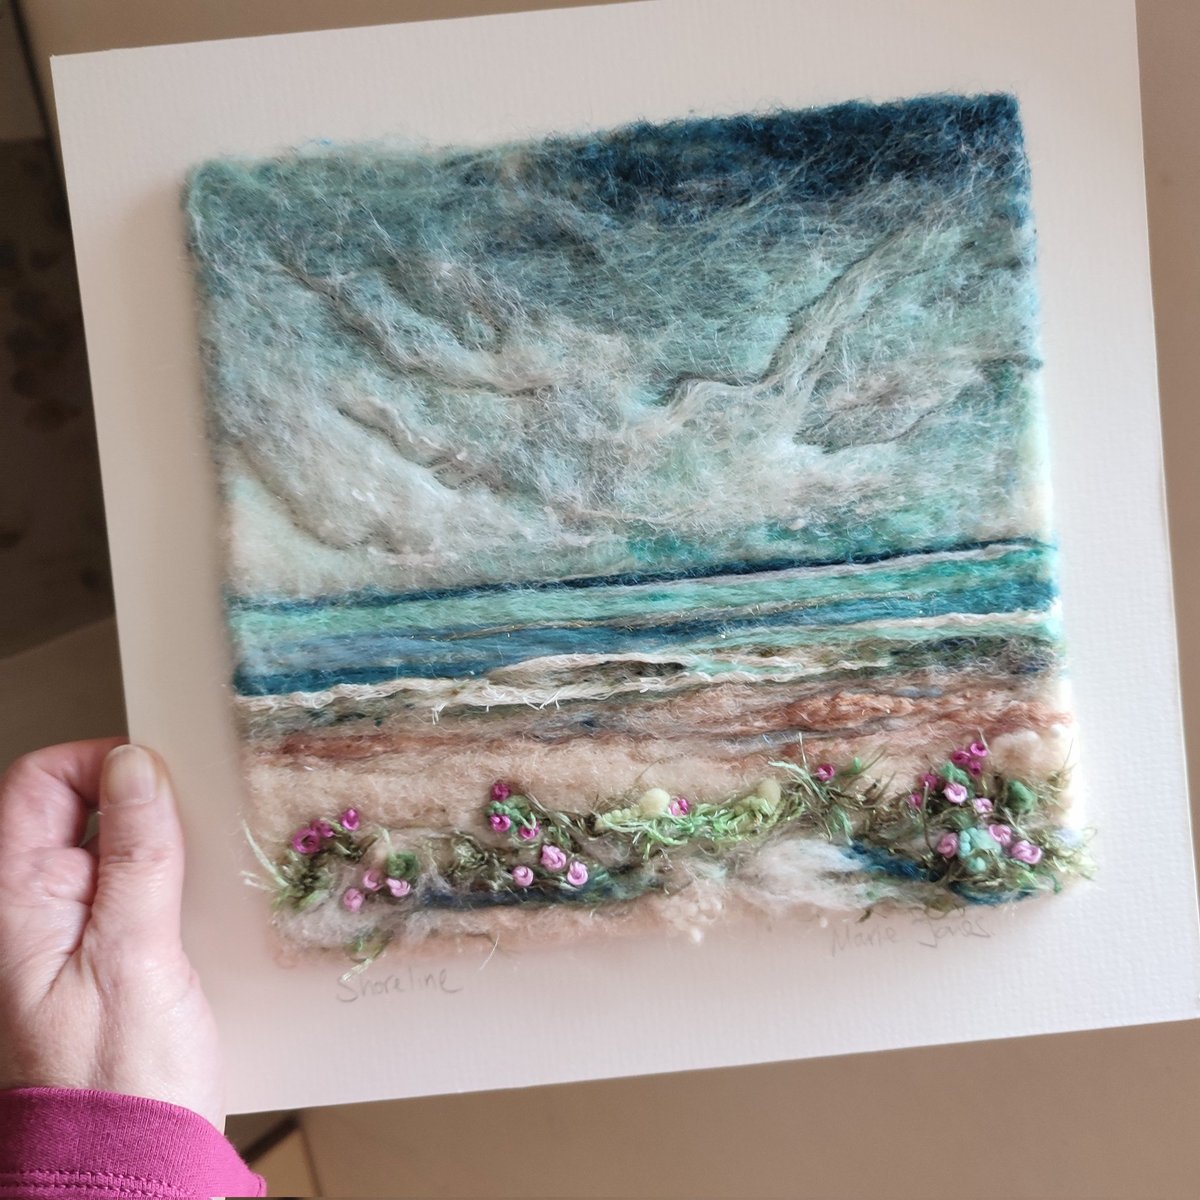 Take a walk with me to the sea. Shoreline is a needle felted wool fibre and embroidery beachscape with cloud drama and pretty seapinks. Available now etsy.com/shop/MarieJone… @HandmadeHour #handmadehour #etsy #etsyshop #ArtistOnTwitter